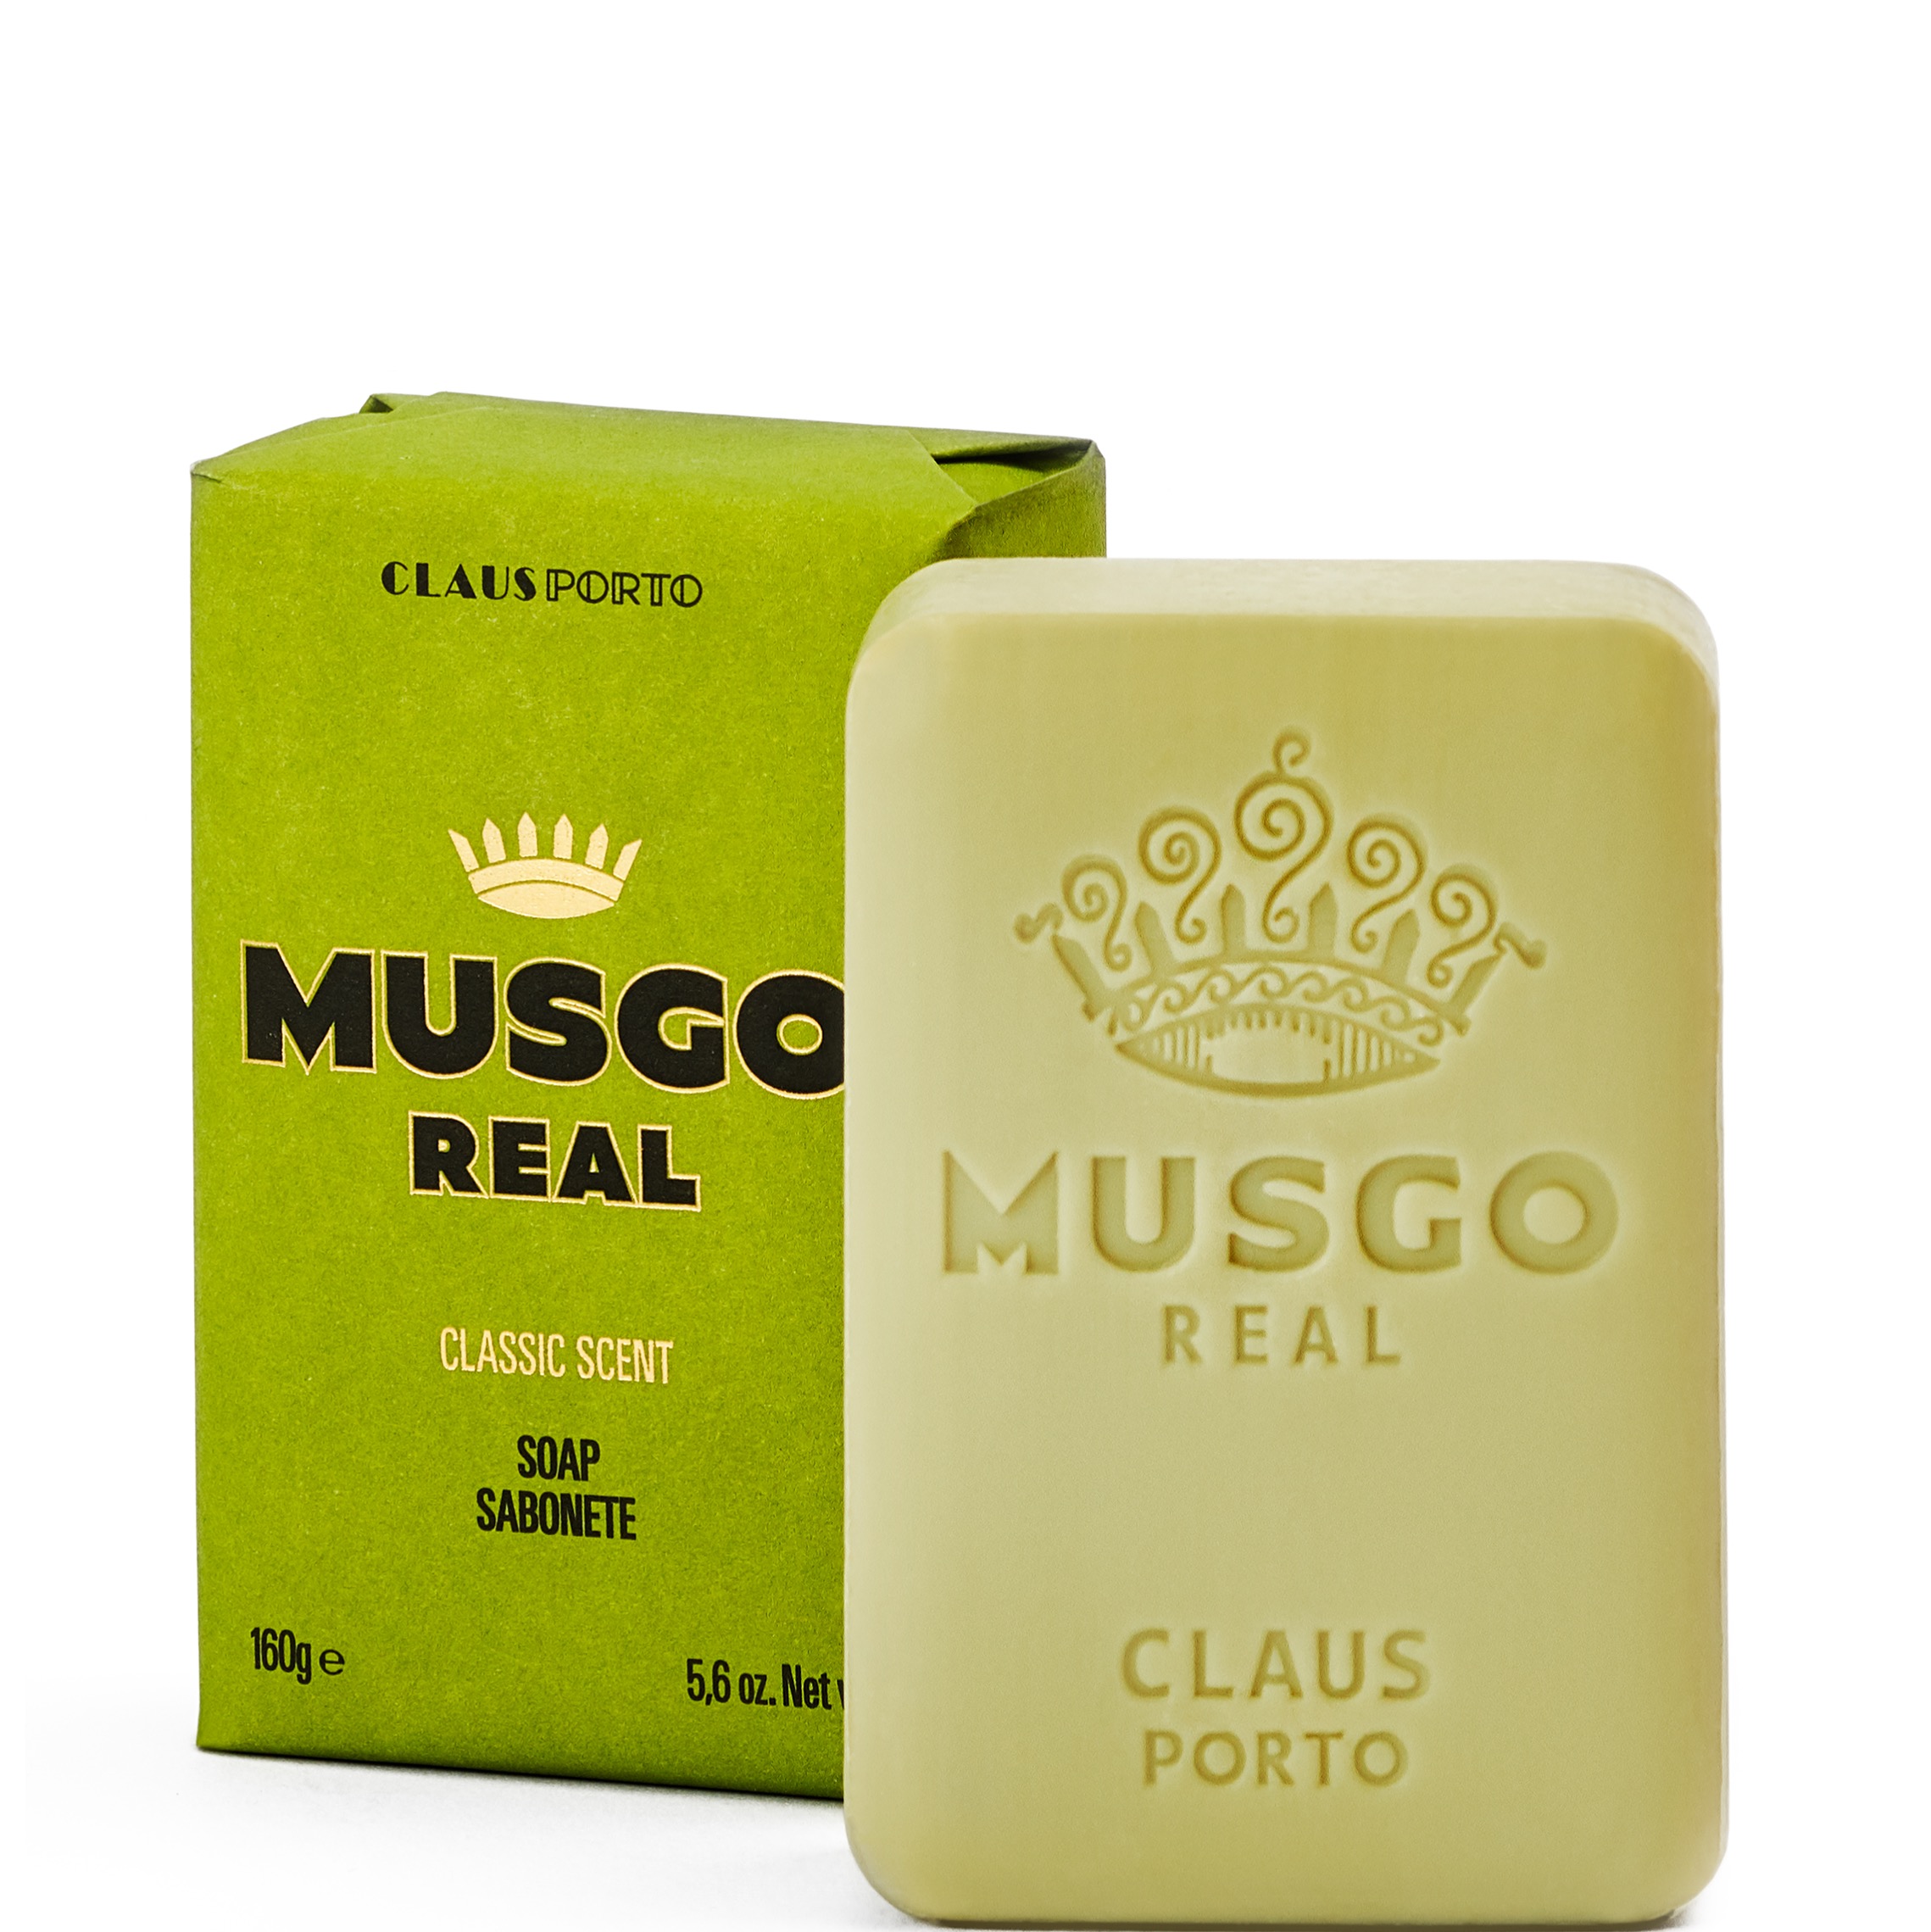 Musgo Real Body Soap Classic scent 160gr - 1.1 - MR-199EXP